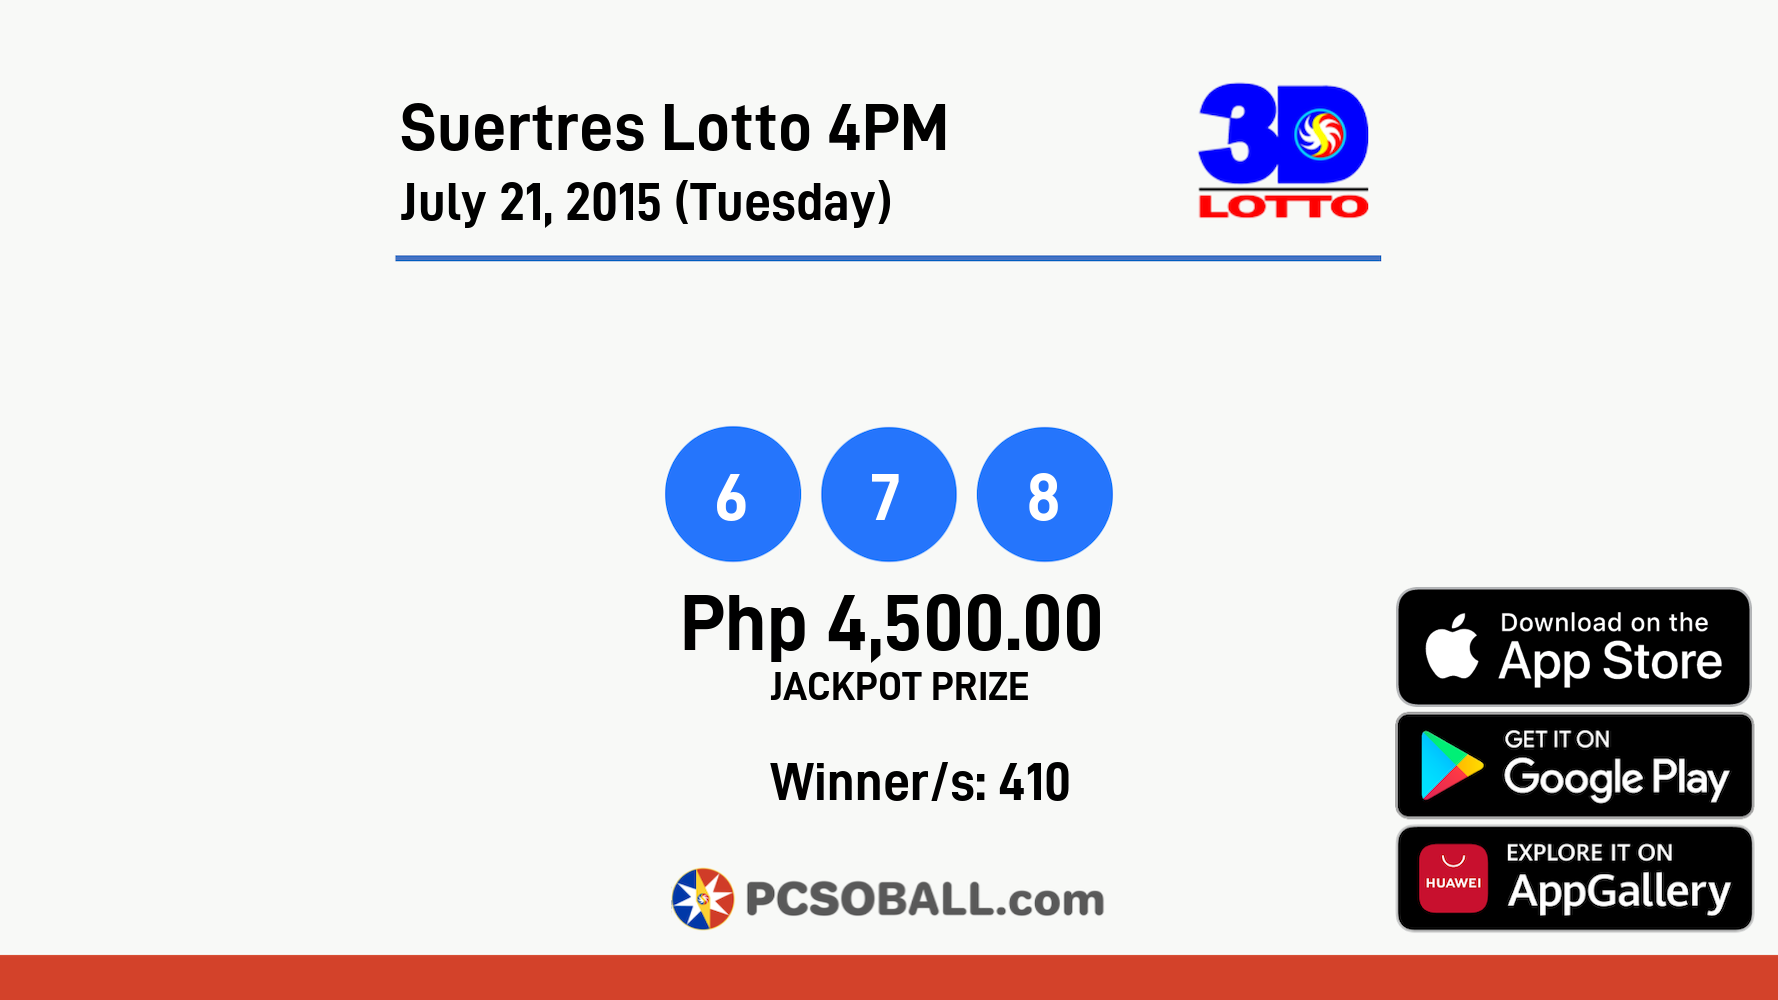 Suertres Lotto 4PM July 21, 2015 (Tuesday) Result